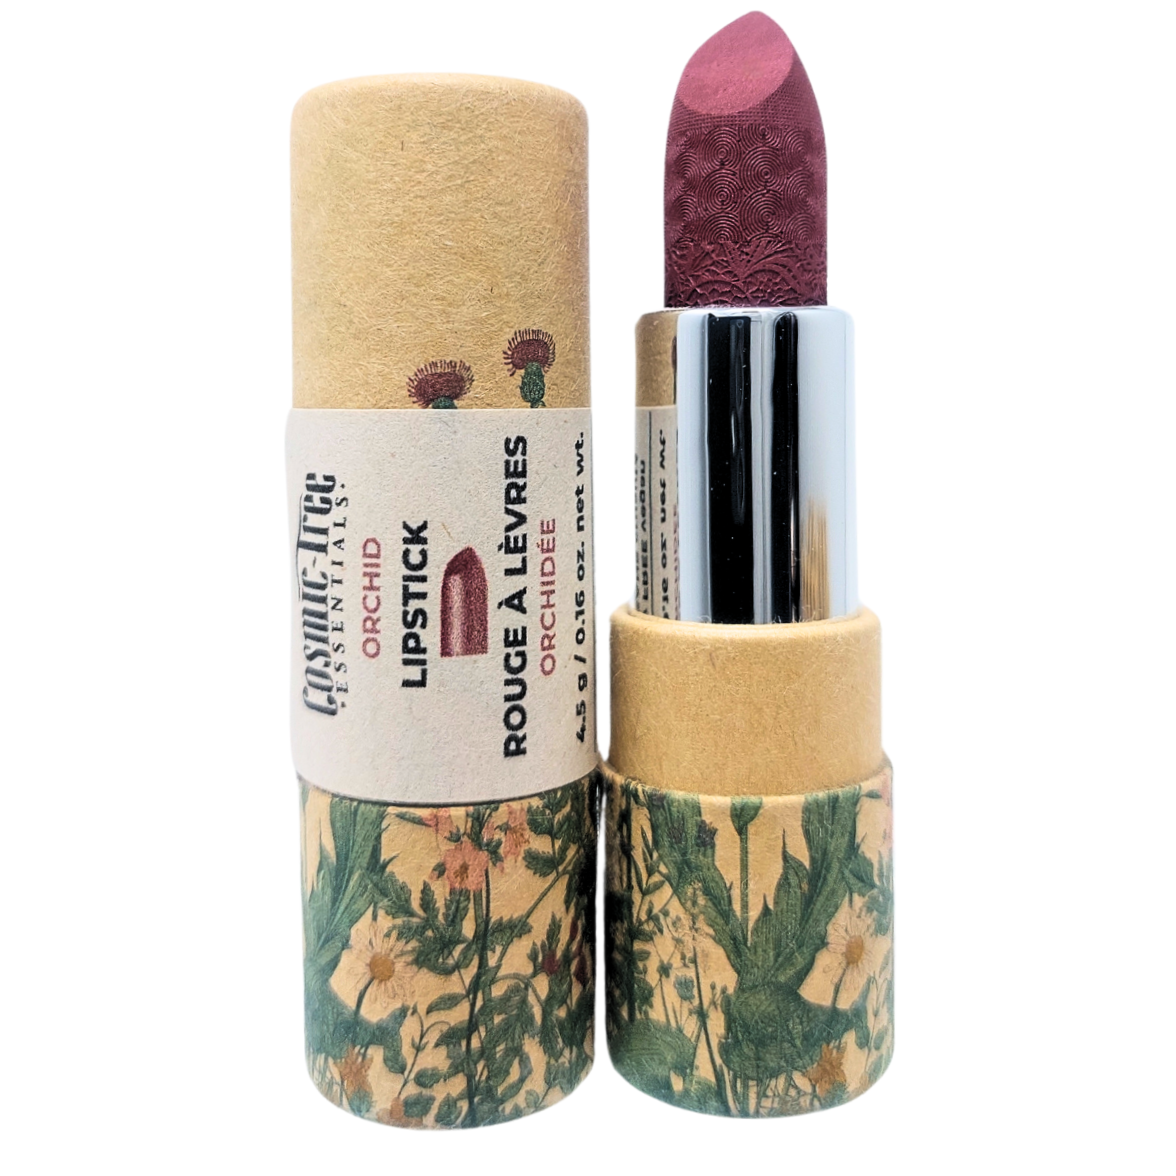 Elemental Coloration Lipstick in Orchid